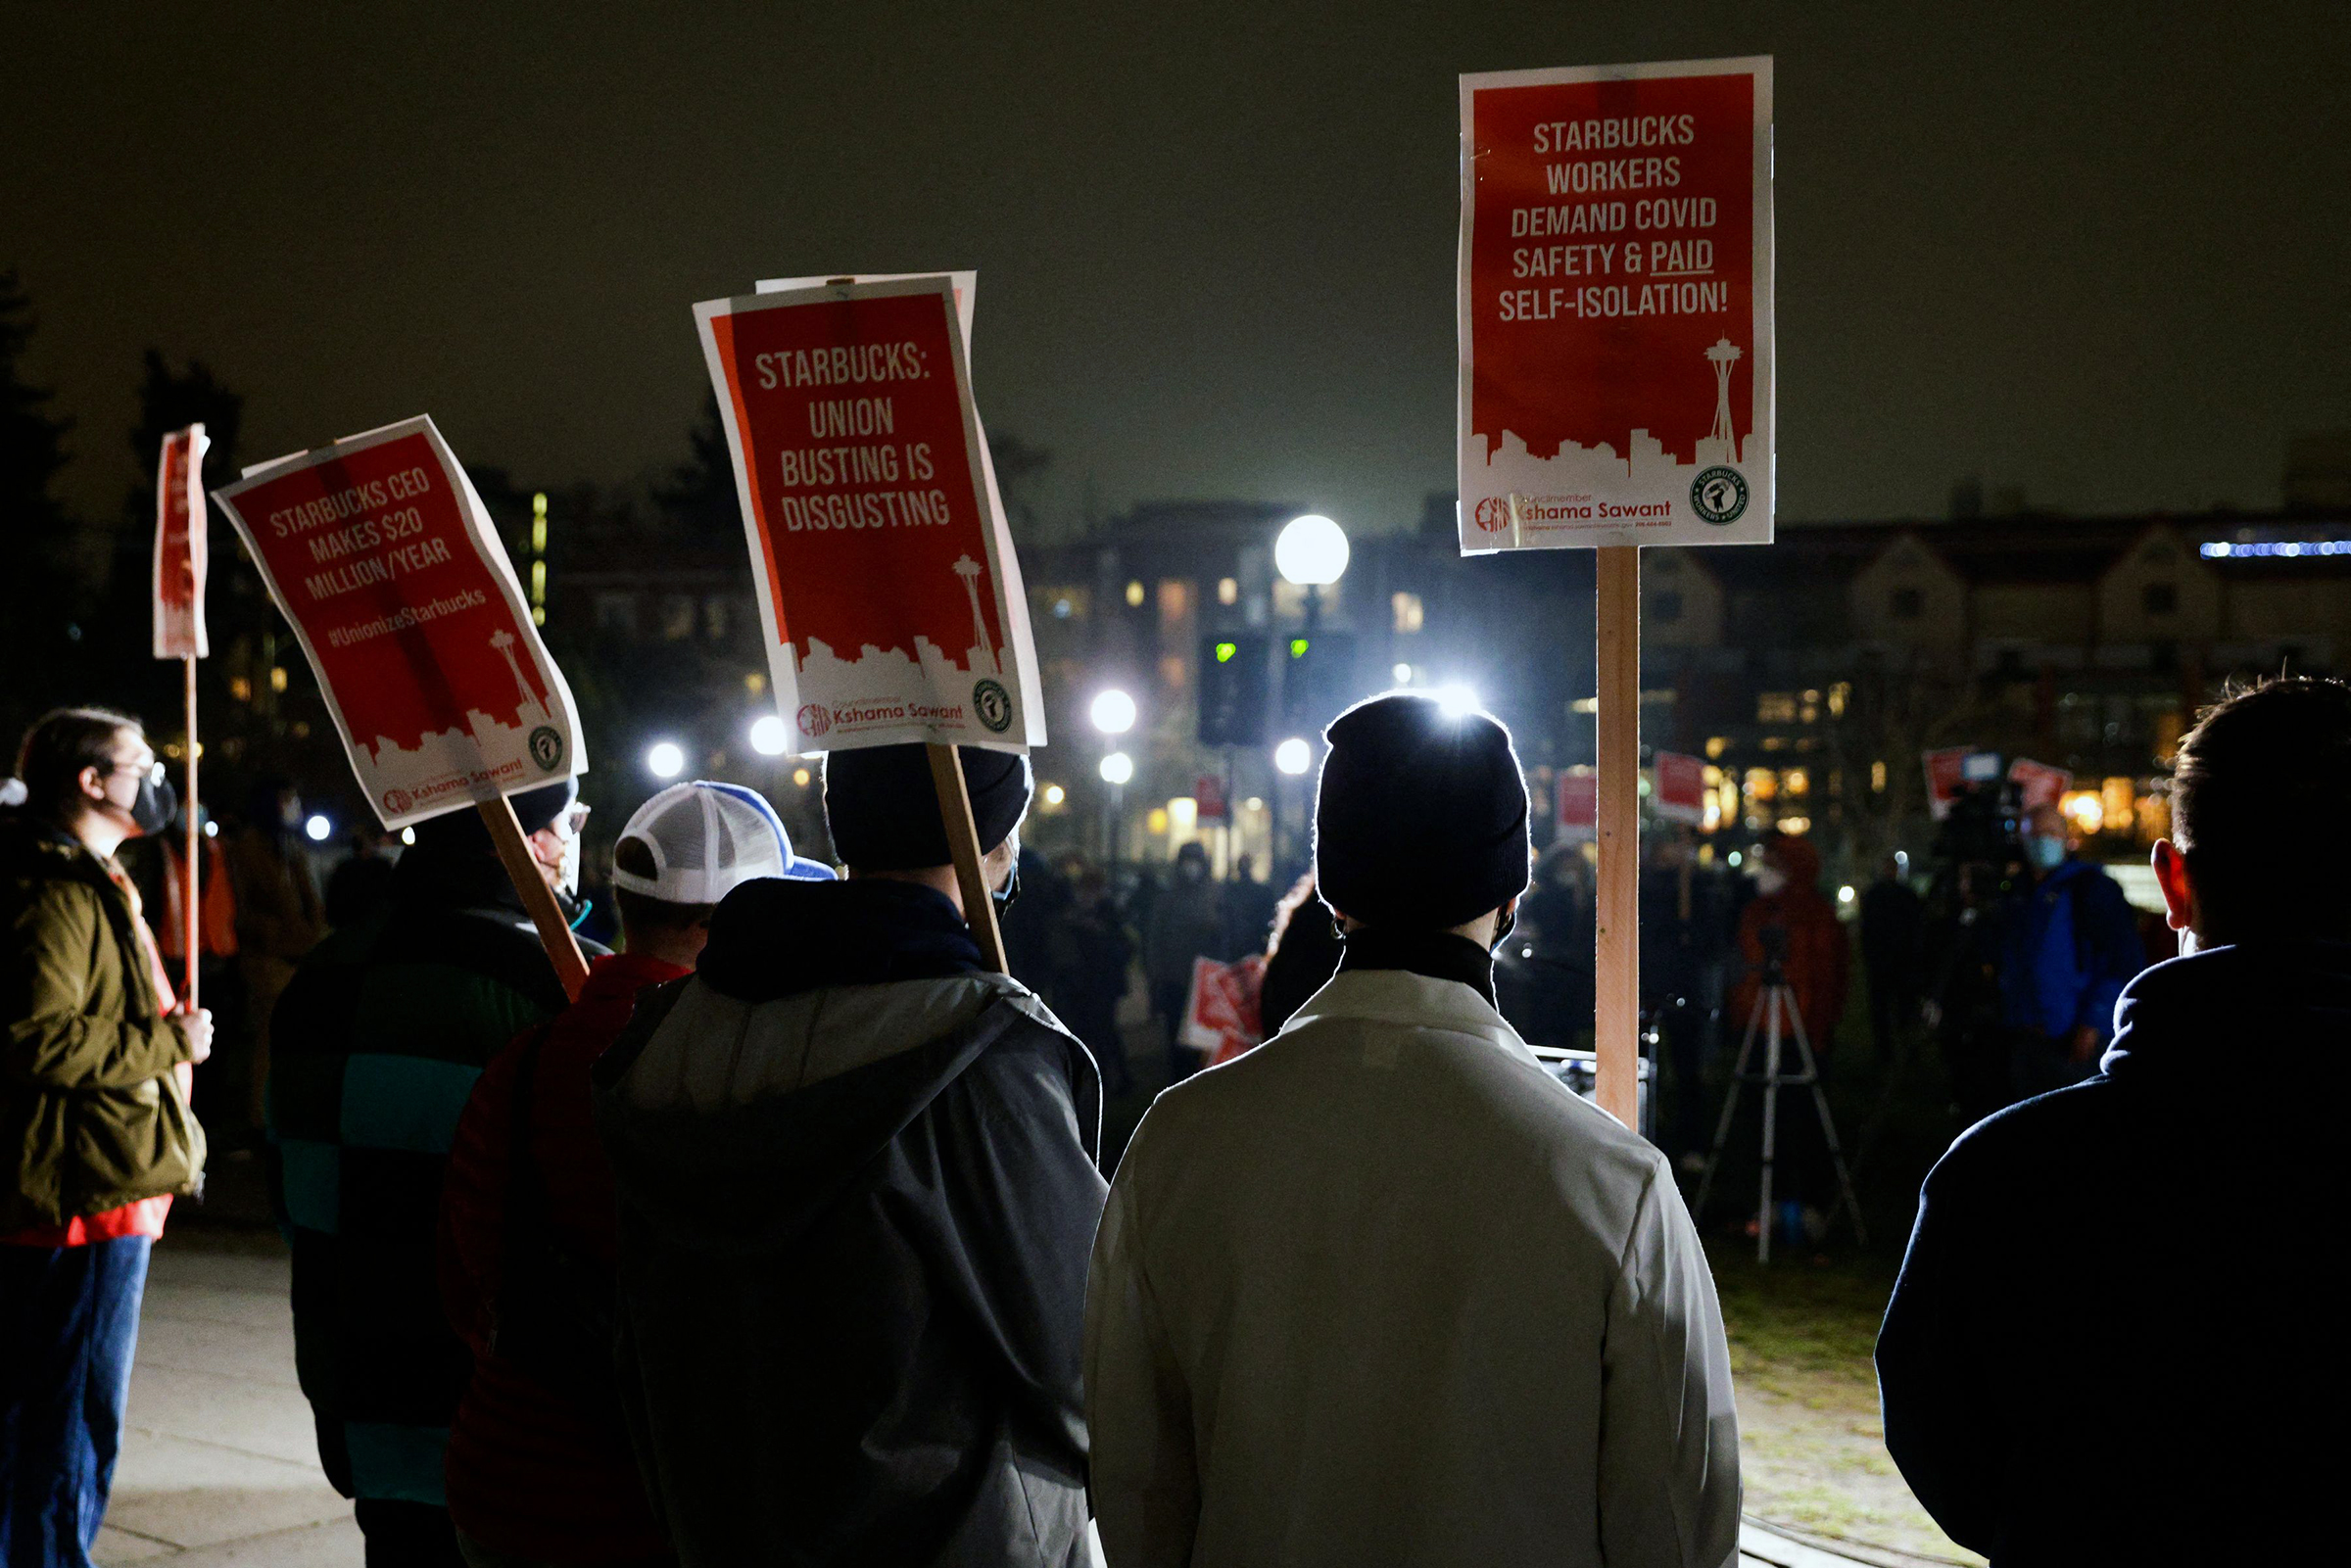 Representatives from local unions hold signs in support of workers of two Seattle Starbucks locations that announced plans to unionize, during an evening rally at Cal Anderson Park in Seattle, Washington, January 25, 2022.